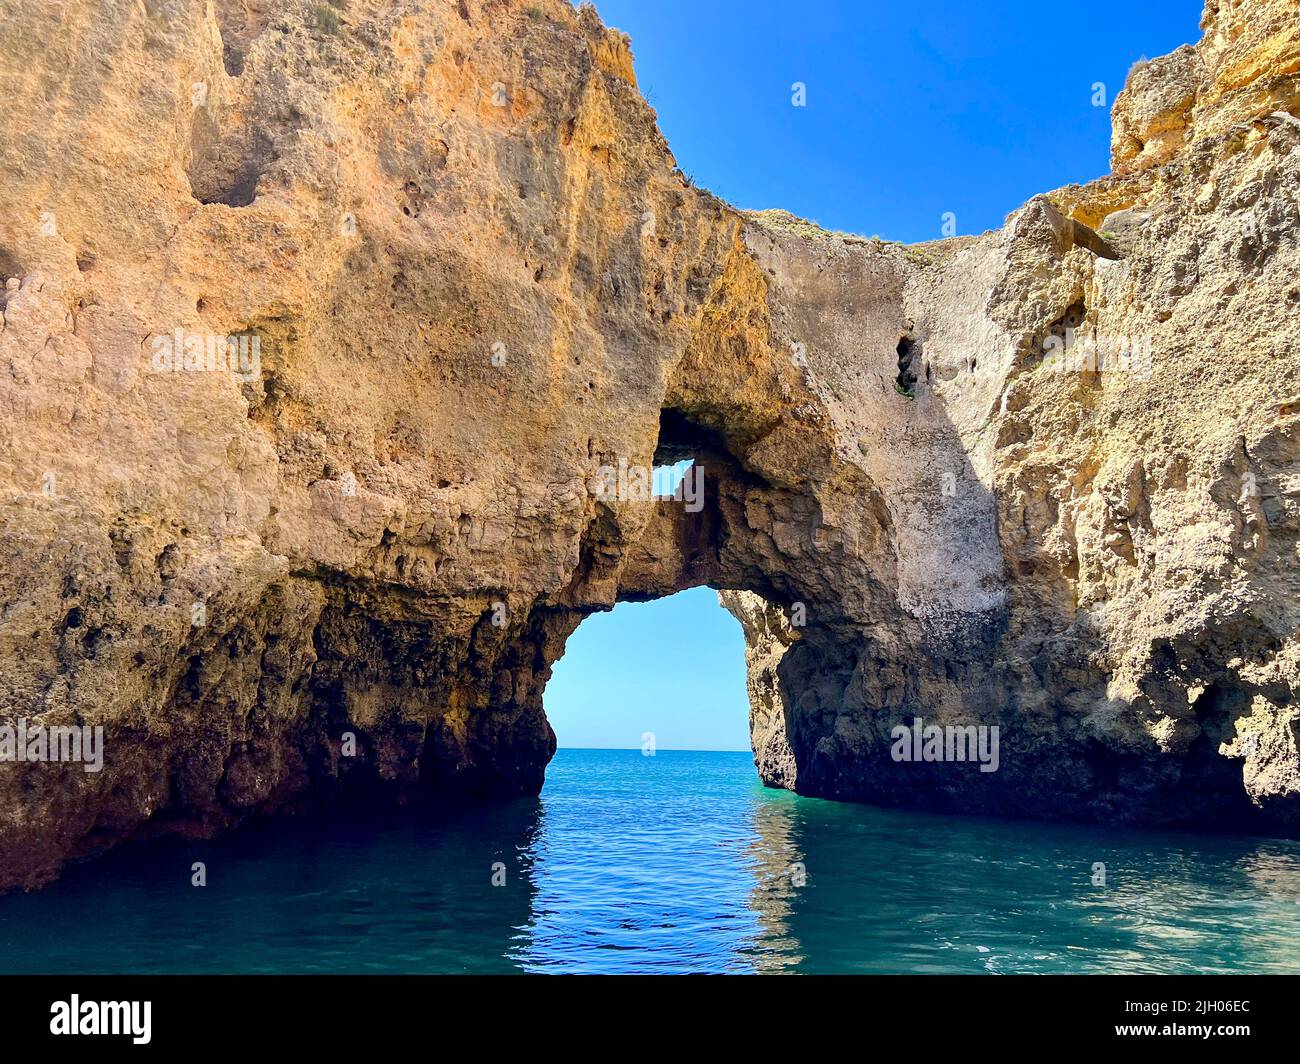 Ponta da Piedade headland is one of the finest natural features of the Algarve. Limestone coastline is formed of sea pillars, rock arches and grottos. Stock Photo